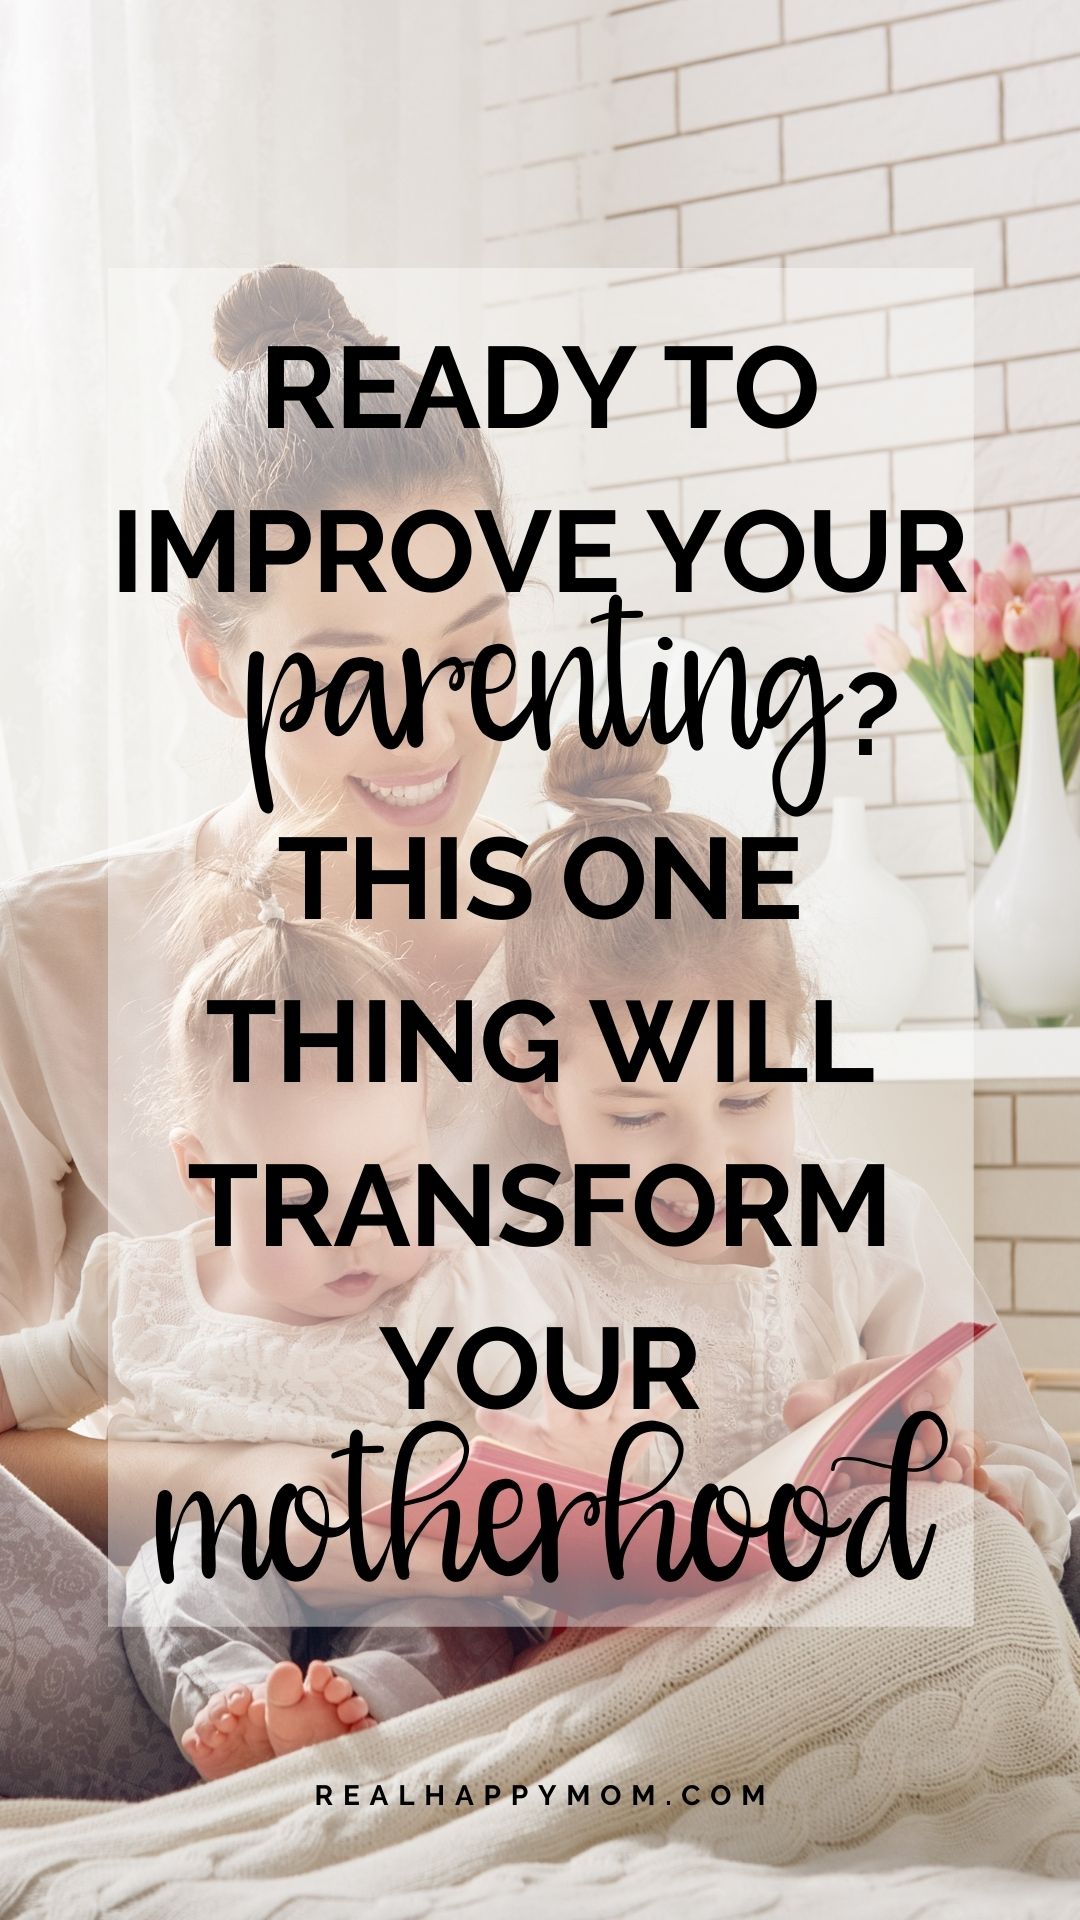 Ready to Improve Your Parenting? This One Thing Will Transform Your Motherhood